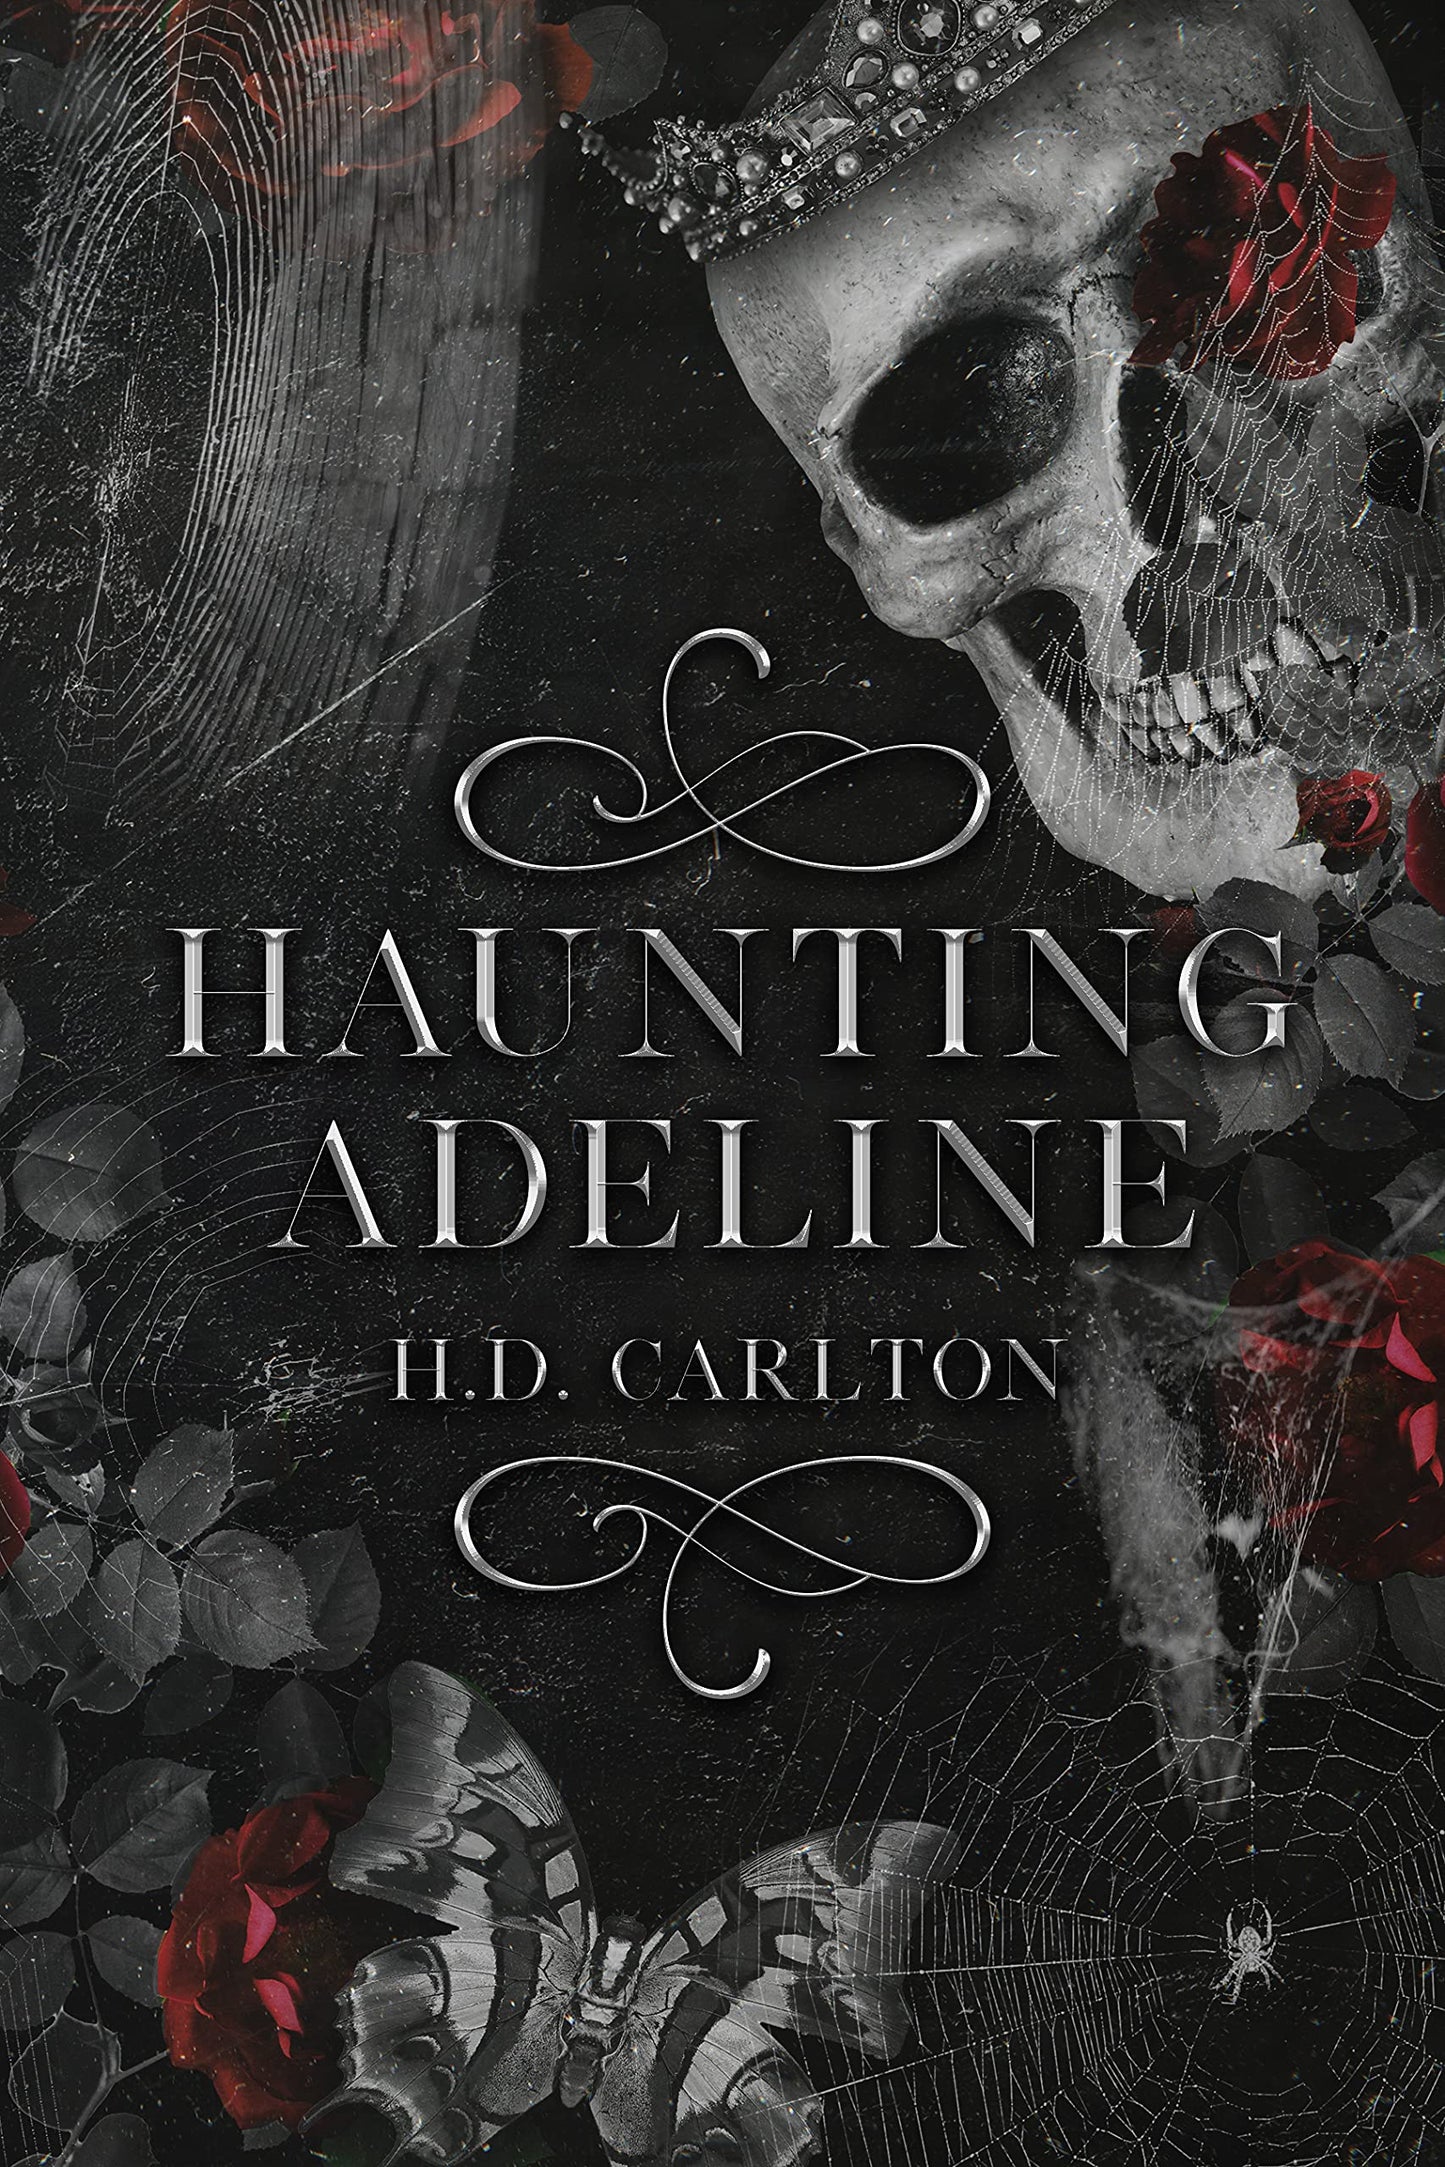 Haunting Adeline
Book by H. D. Carlton